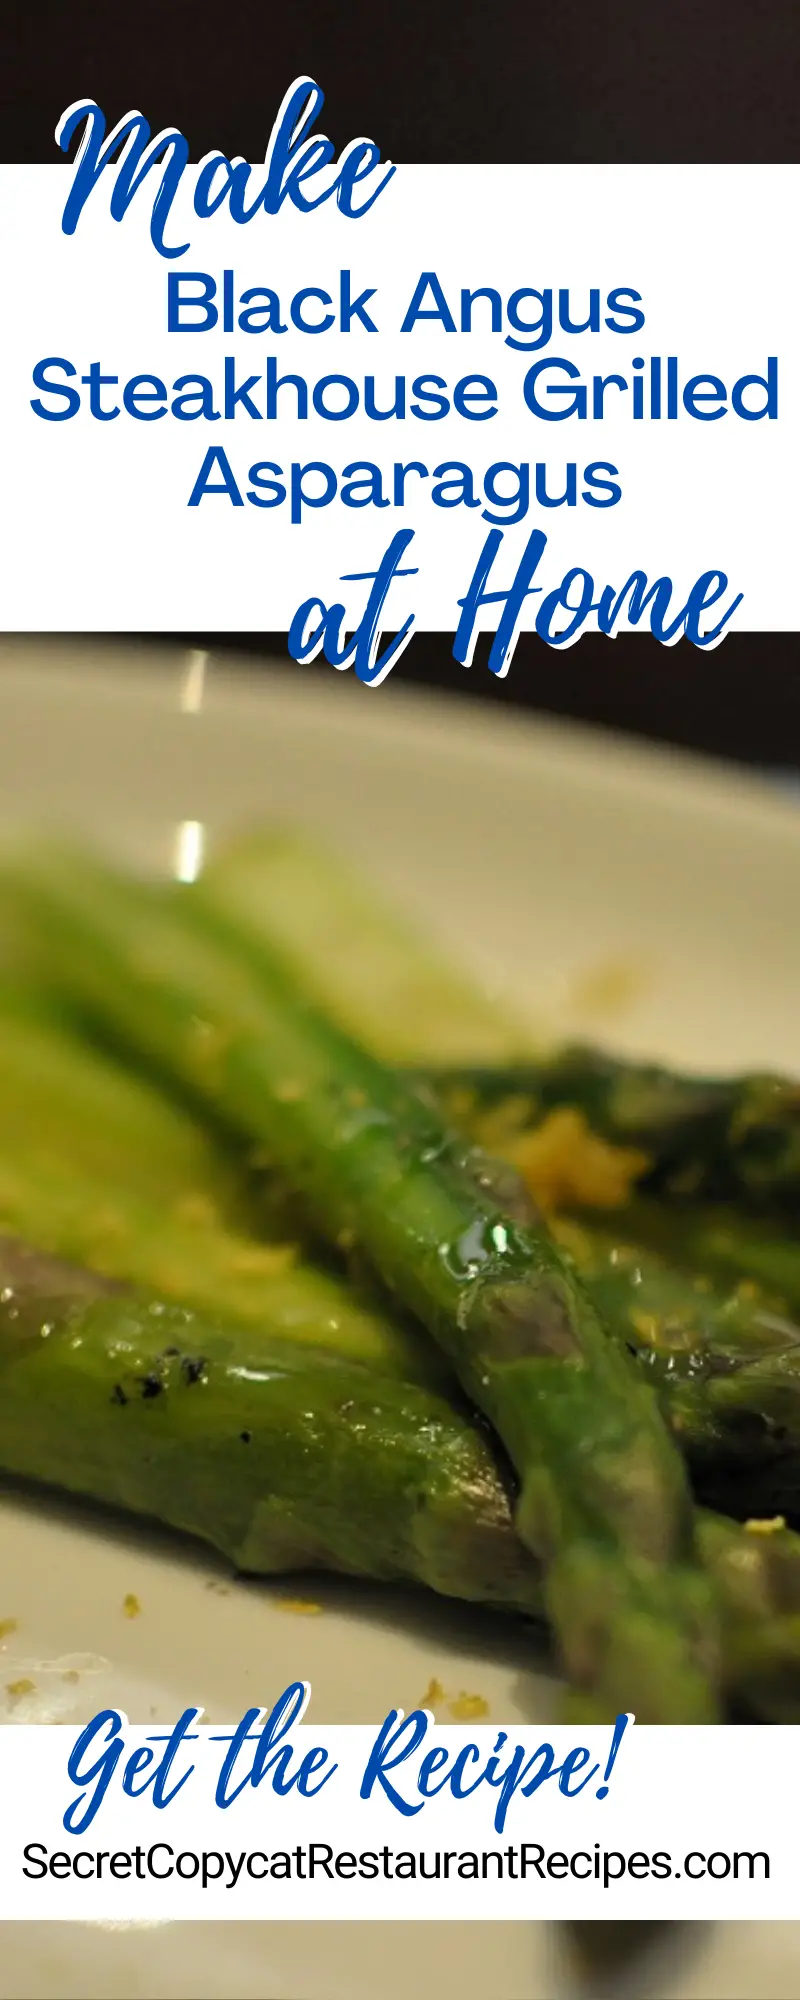 Black Angus Steakhouse Grilled Asparagus Recipe